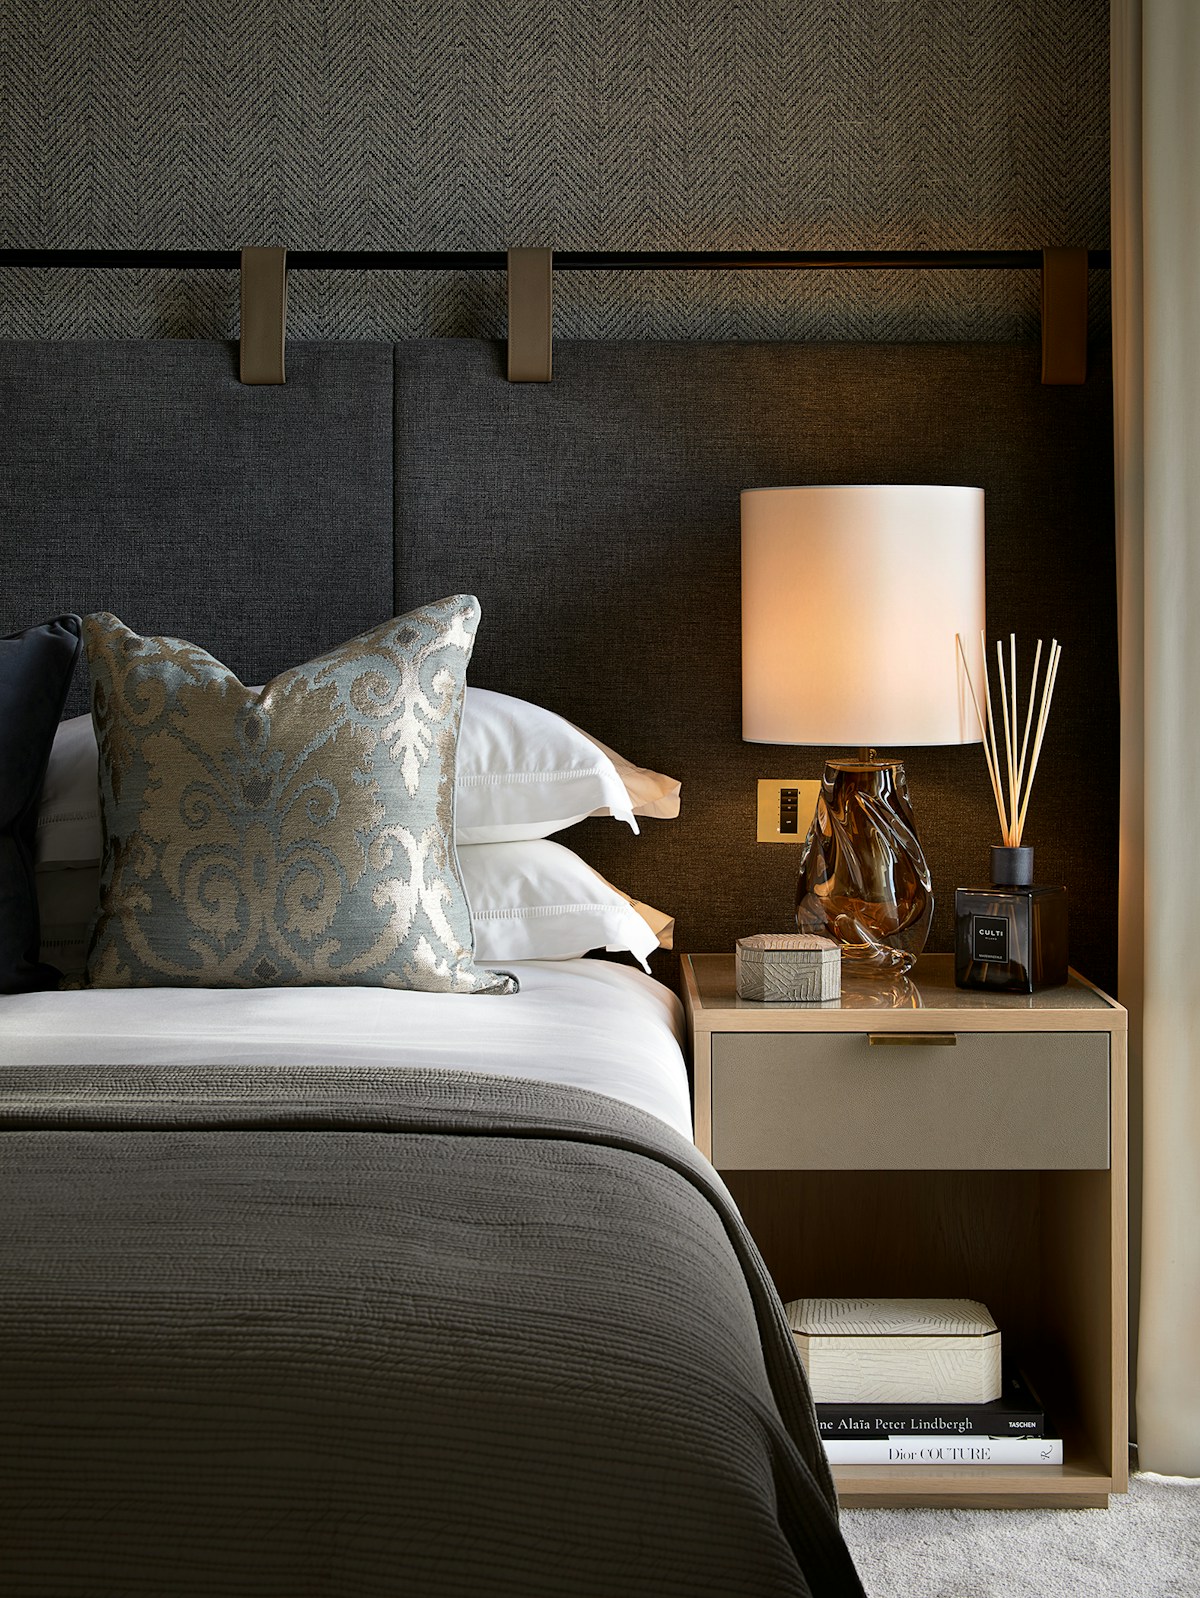 Luxury bedroom setting featuring the Laura Hammett Living collection's Elemental Ivory Coasters and Ivory Media Box